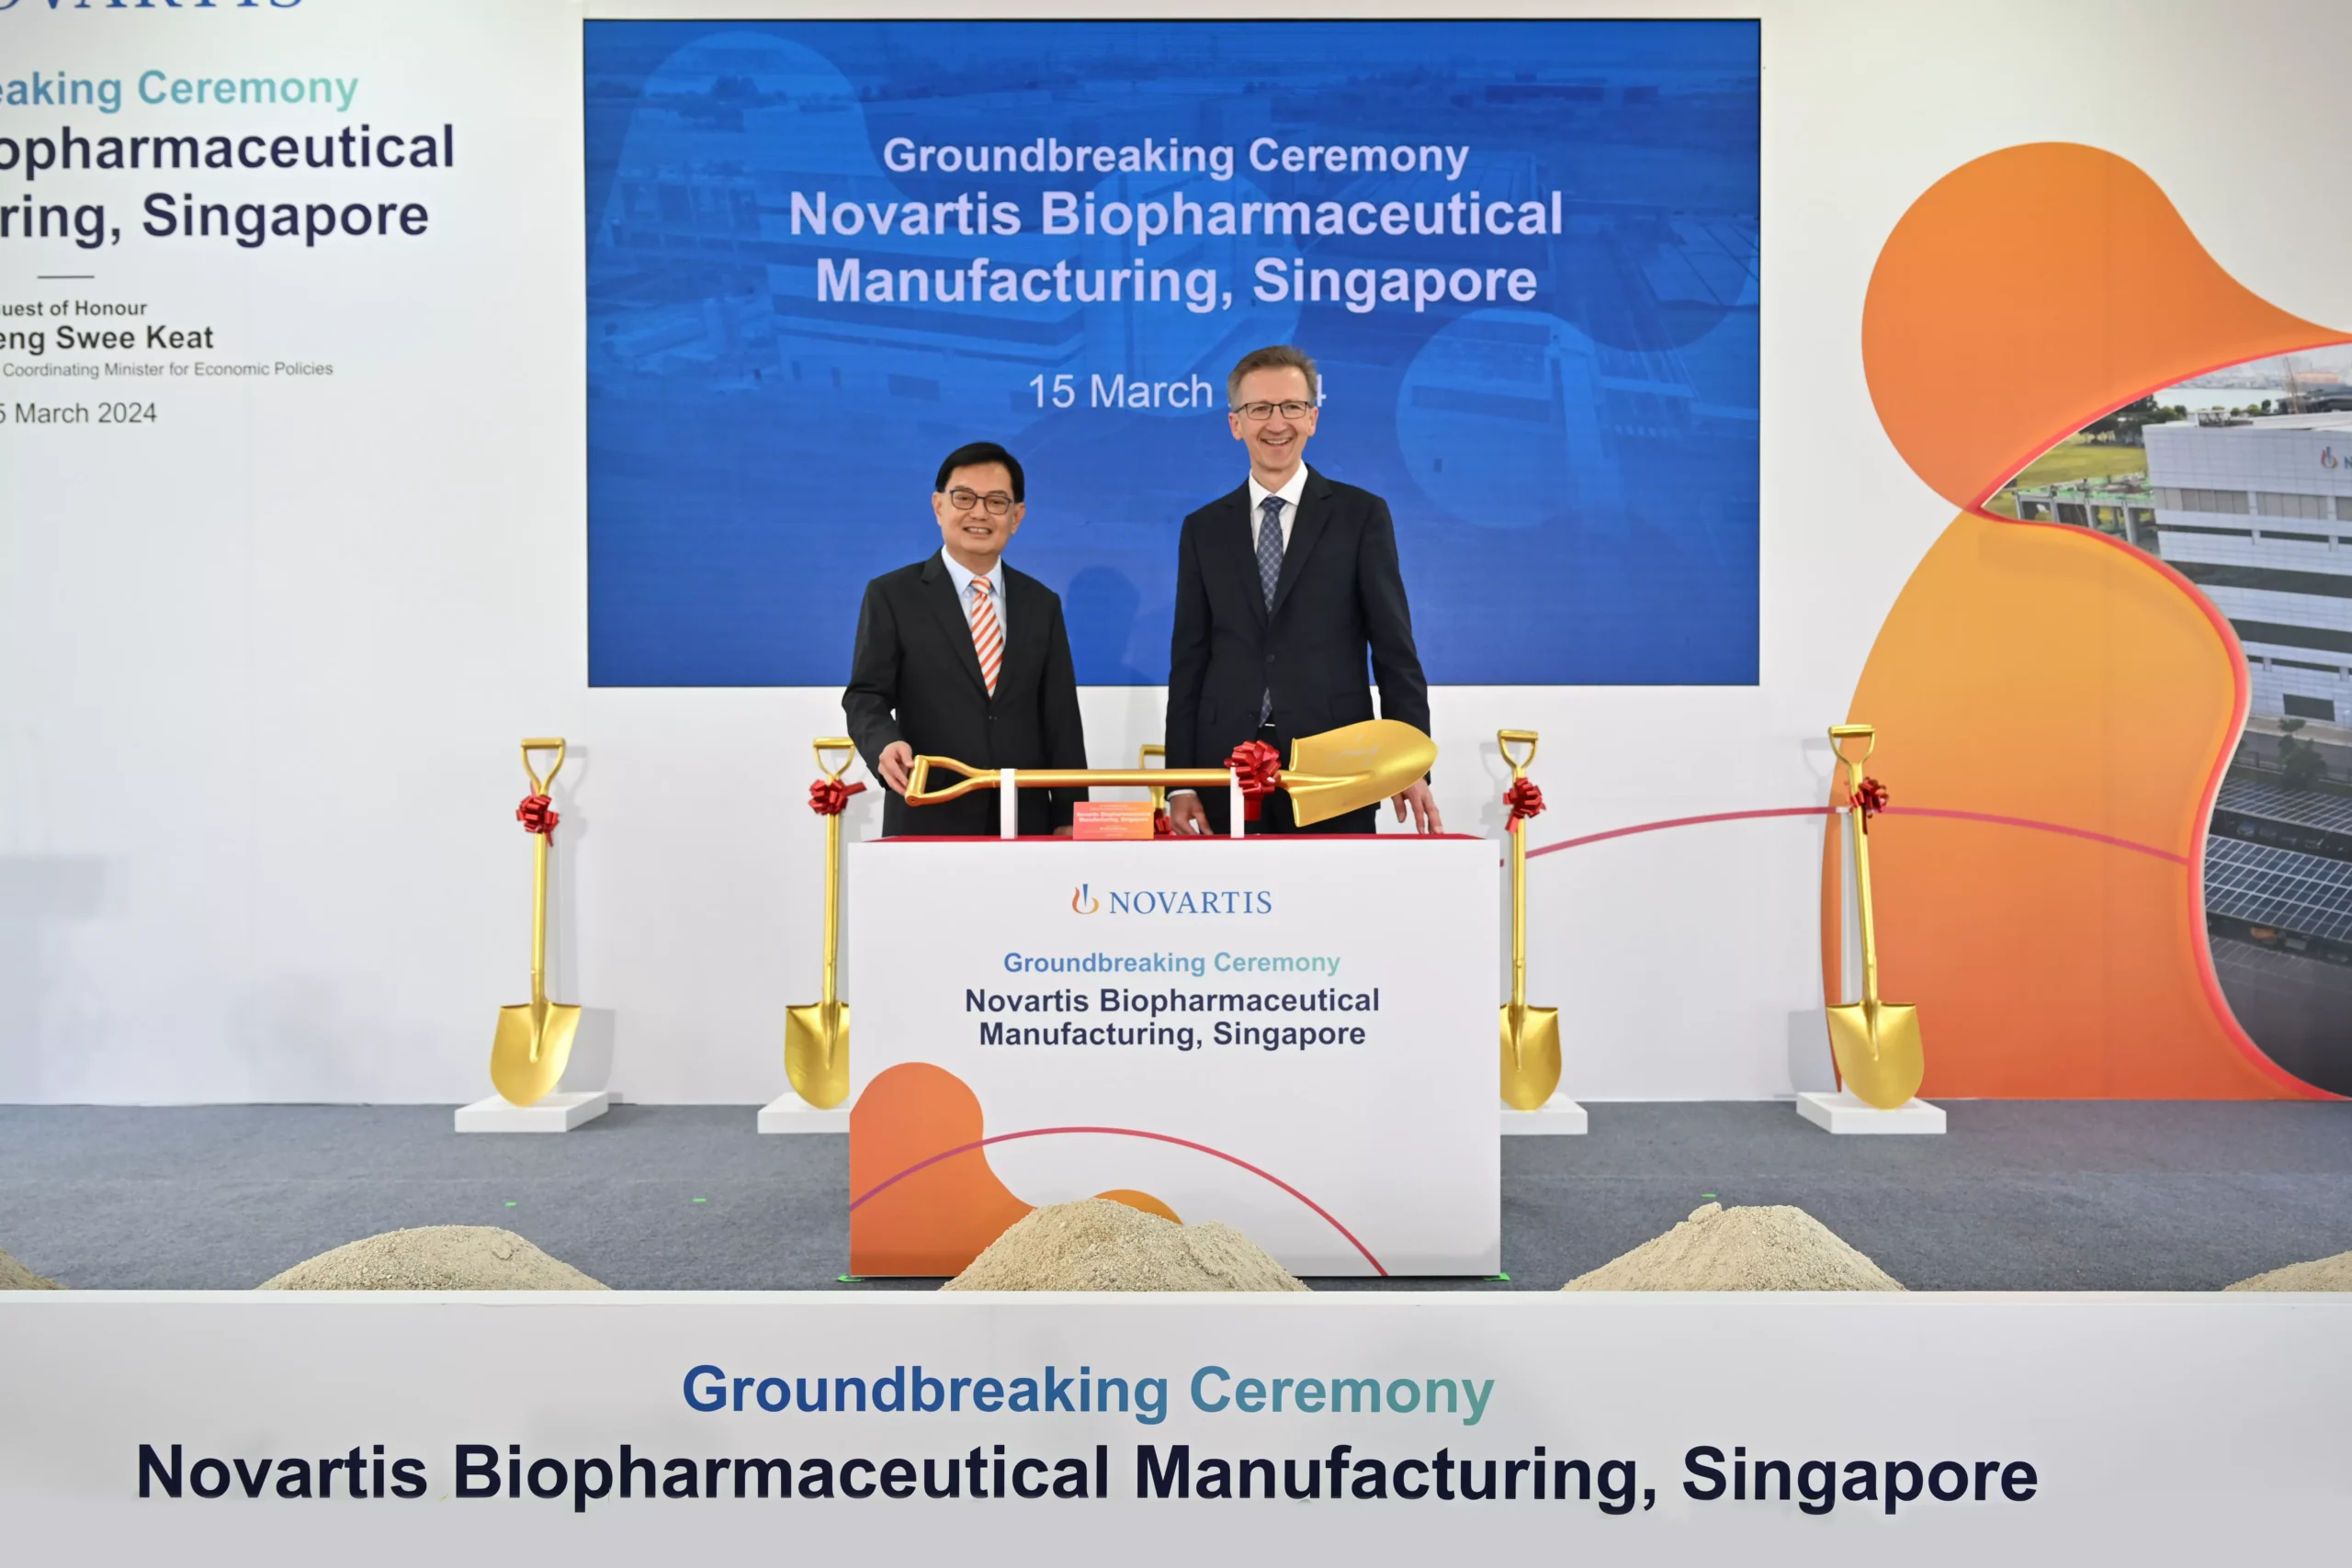 Mr Heng Swee Keat, Deputy Prime Minister and Coordinating Minister for Economic Policies delivering speech at the Groundbreaking Ceremony for Novartis Biopharmaceutical Manufacturing, Singapore